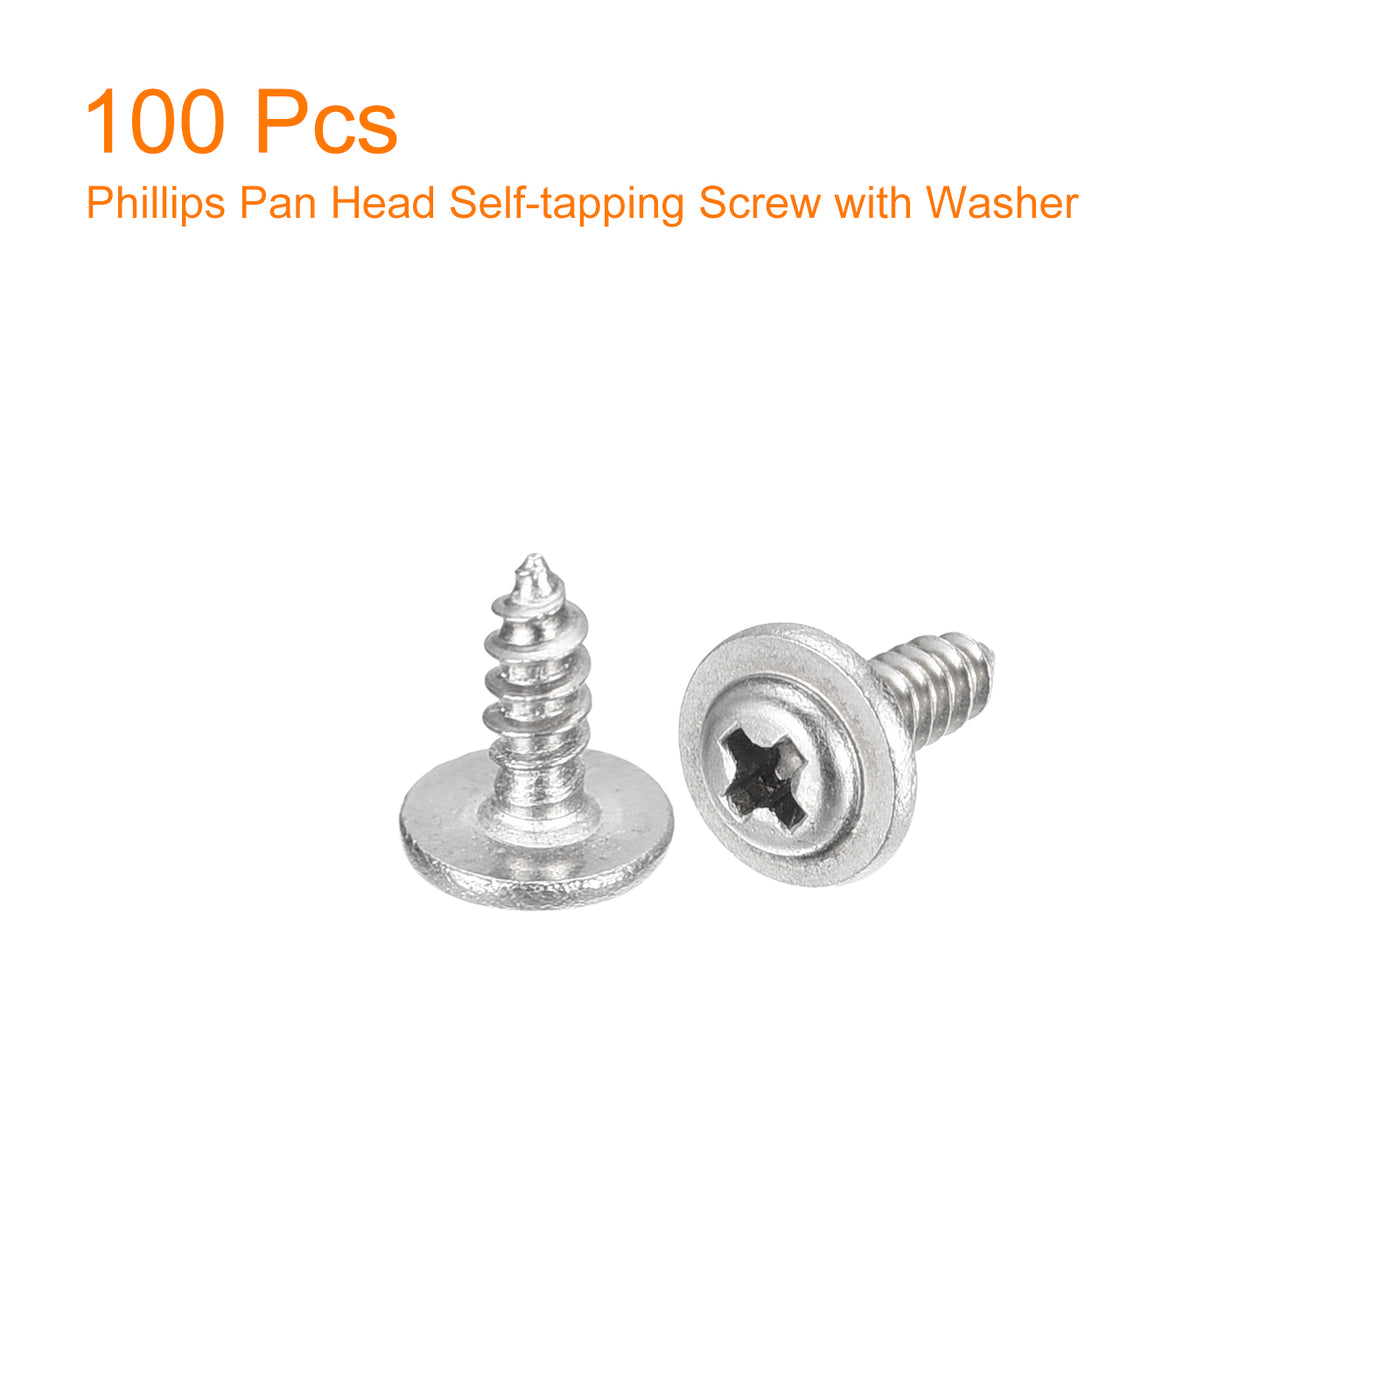 uxcell Uxcell ST2.6x6mm Phillips Pan Head Self-tapping Screw with Washer, 100pcs - 304 Stainless Steel Wood Screw Full Thread (Silver)